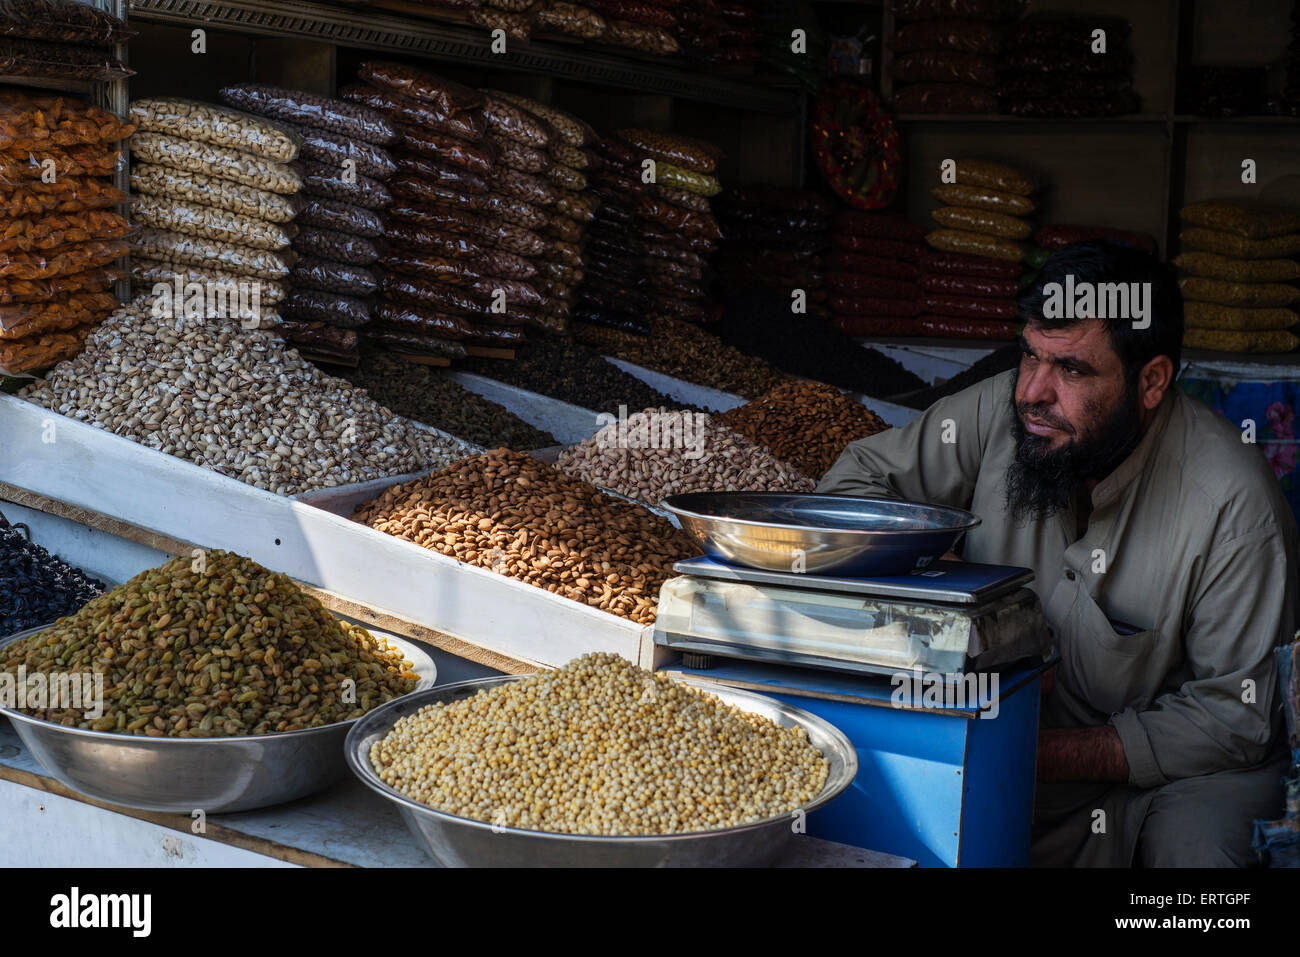 Afghan man sells nuts and seeds in street market in Third Macrorayan, neighborhood built-up by Soviet multistorey apartment houses during Soviet-Afghan military cooperation from 1970s to 1989, Kabul, Afghanistan Stock Photo